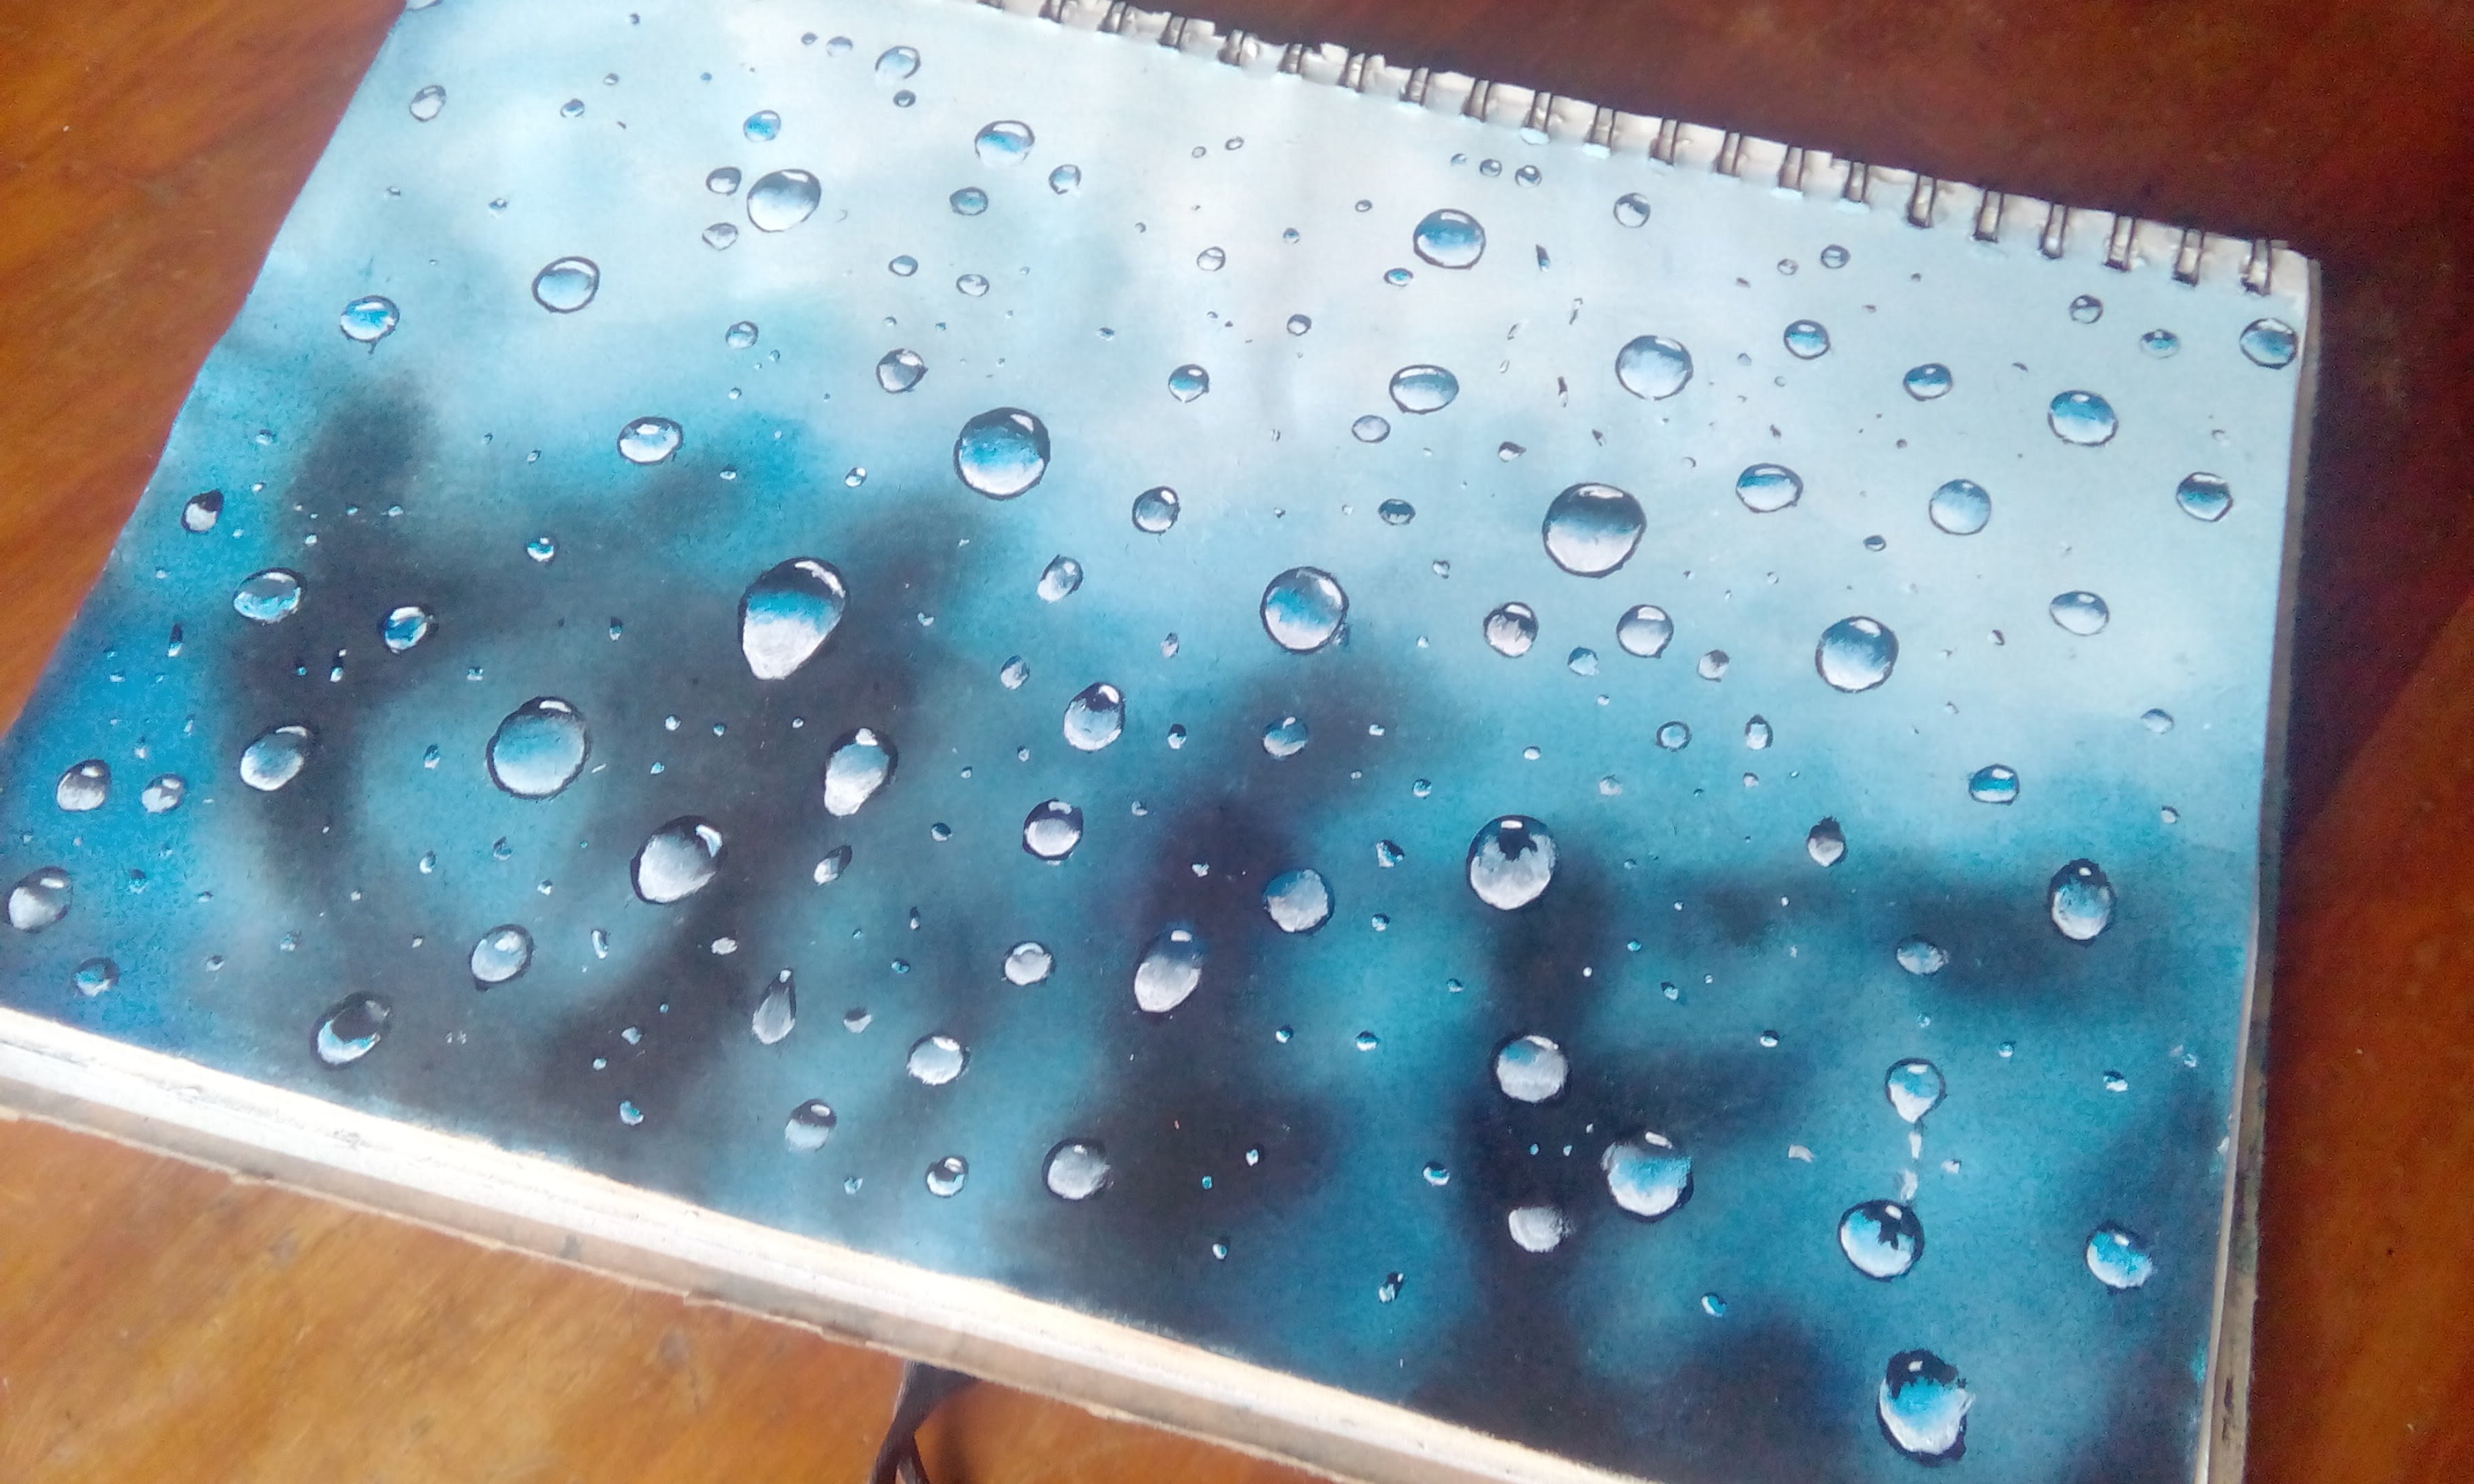 How to paint water drops in acrylics- water drops on glass - YouTube